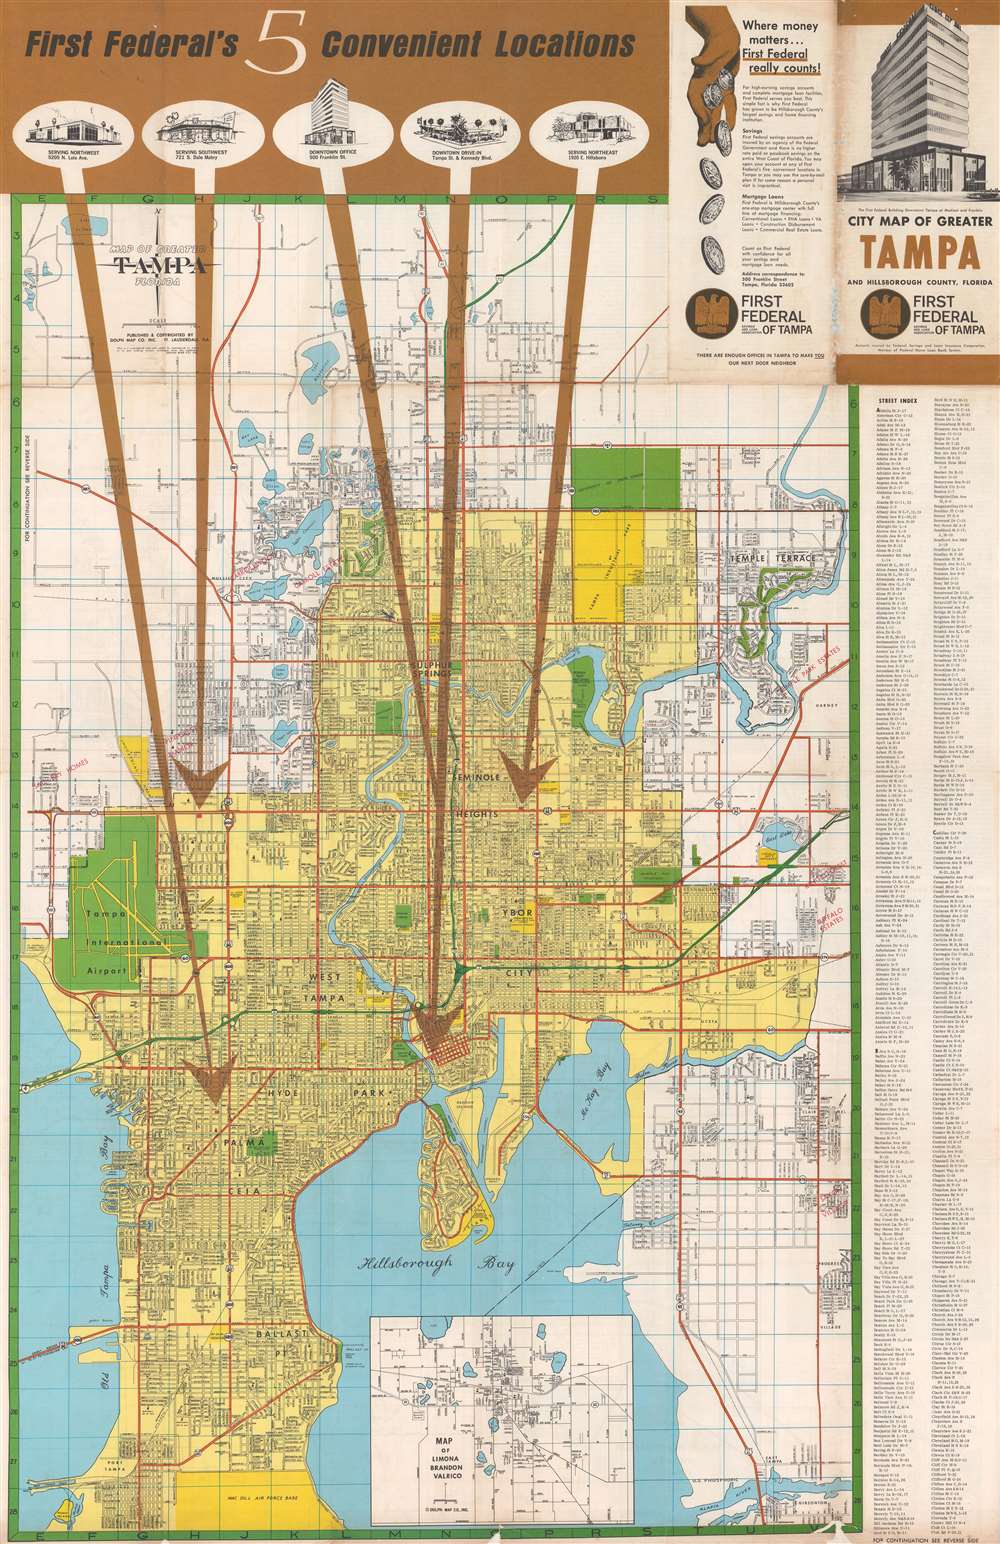 Map of Greater Tampa Florida. / City Map of Greater Tampa and Hillsborough County, Florida. - Main View